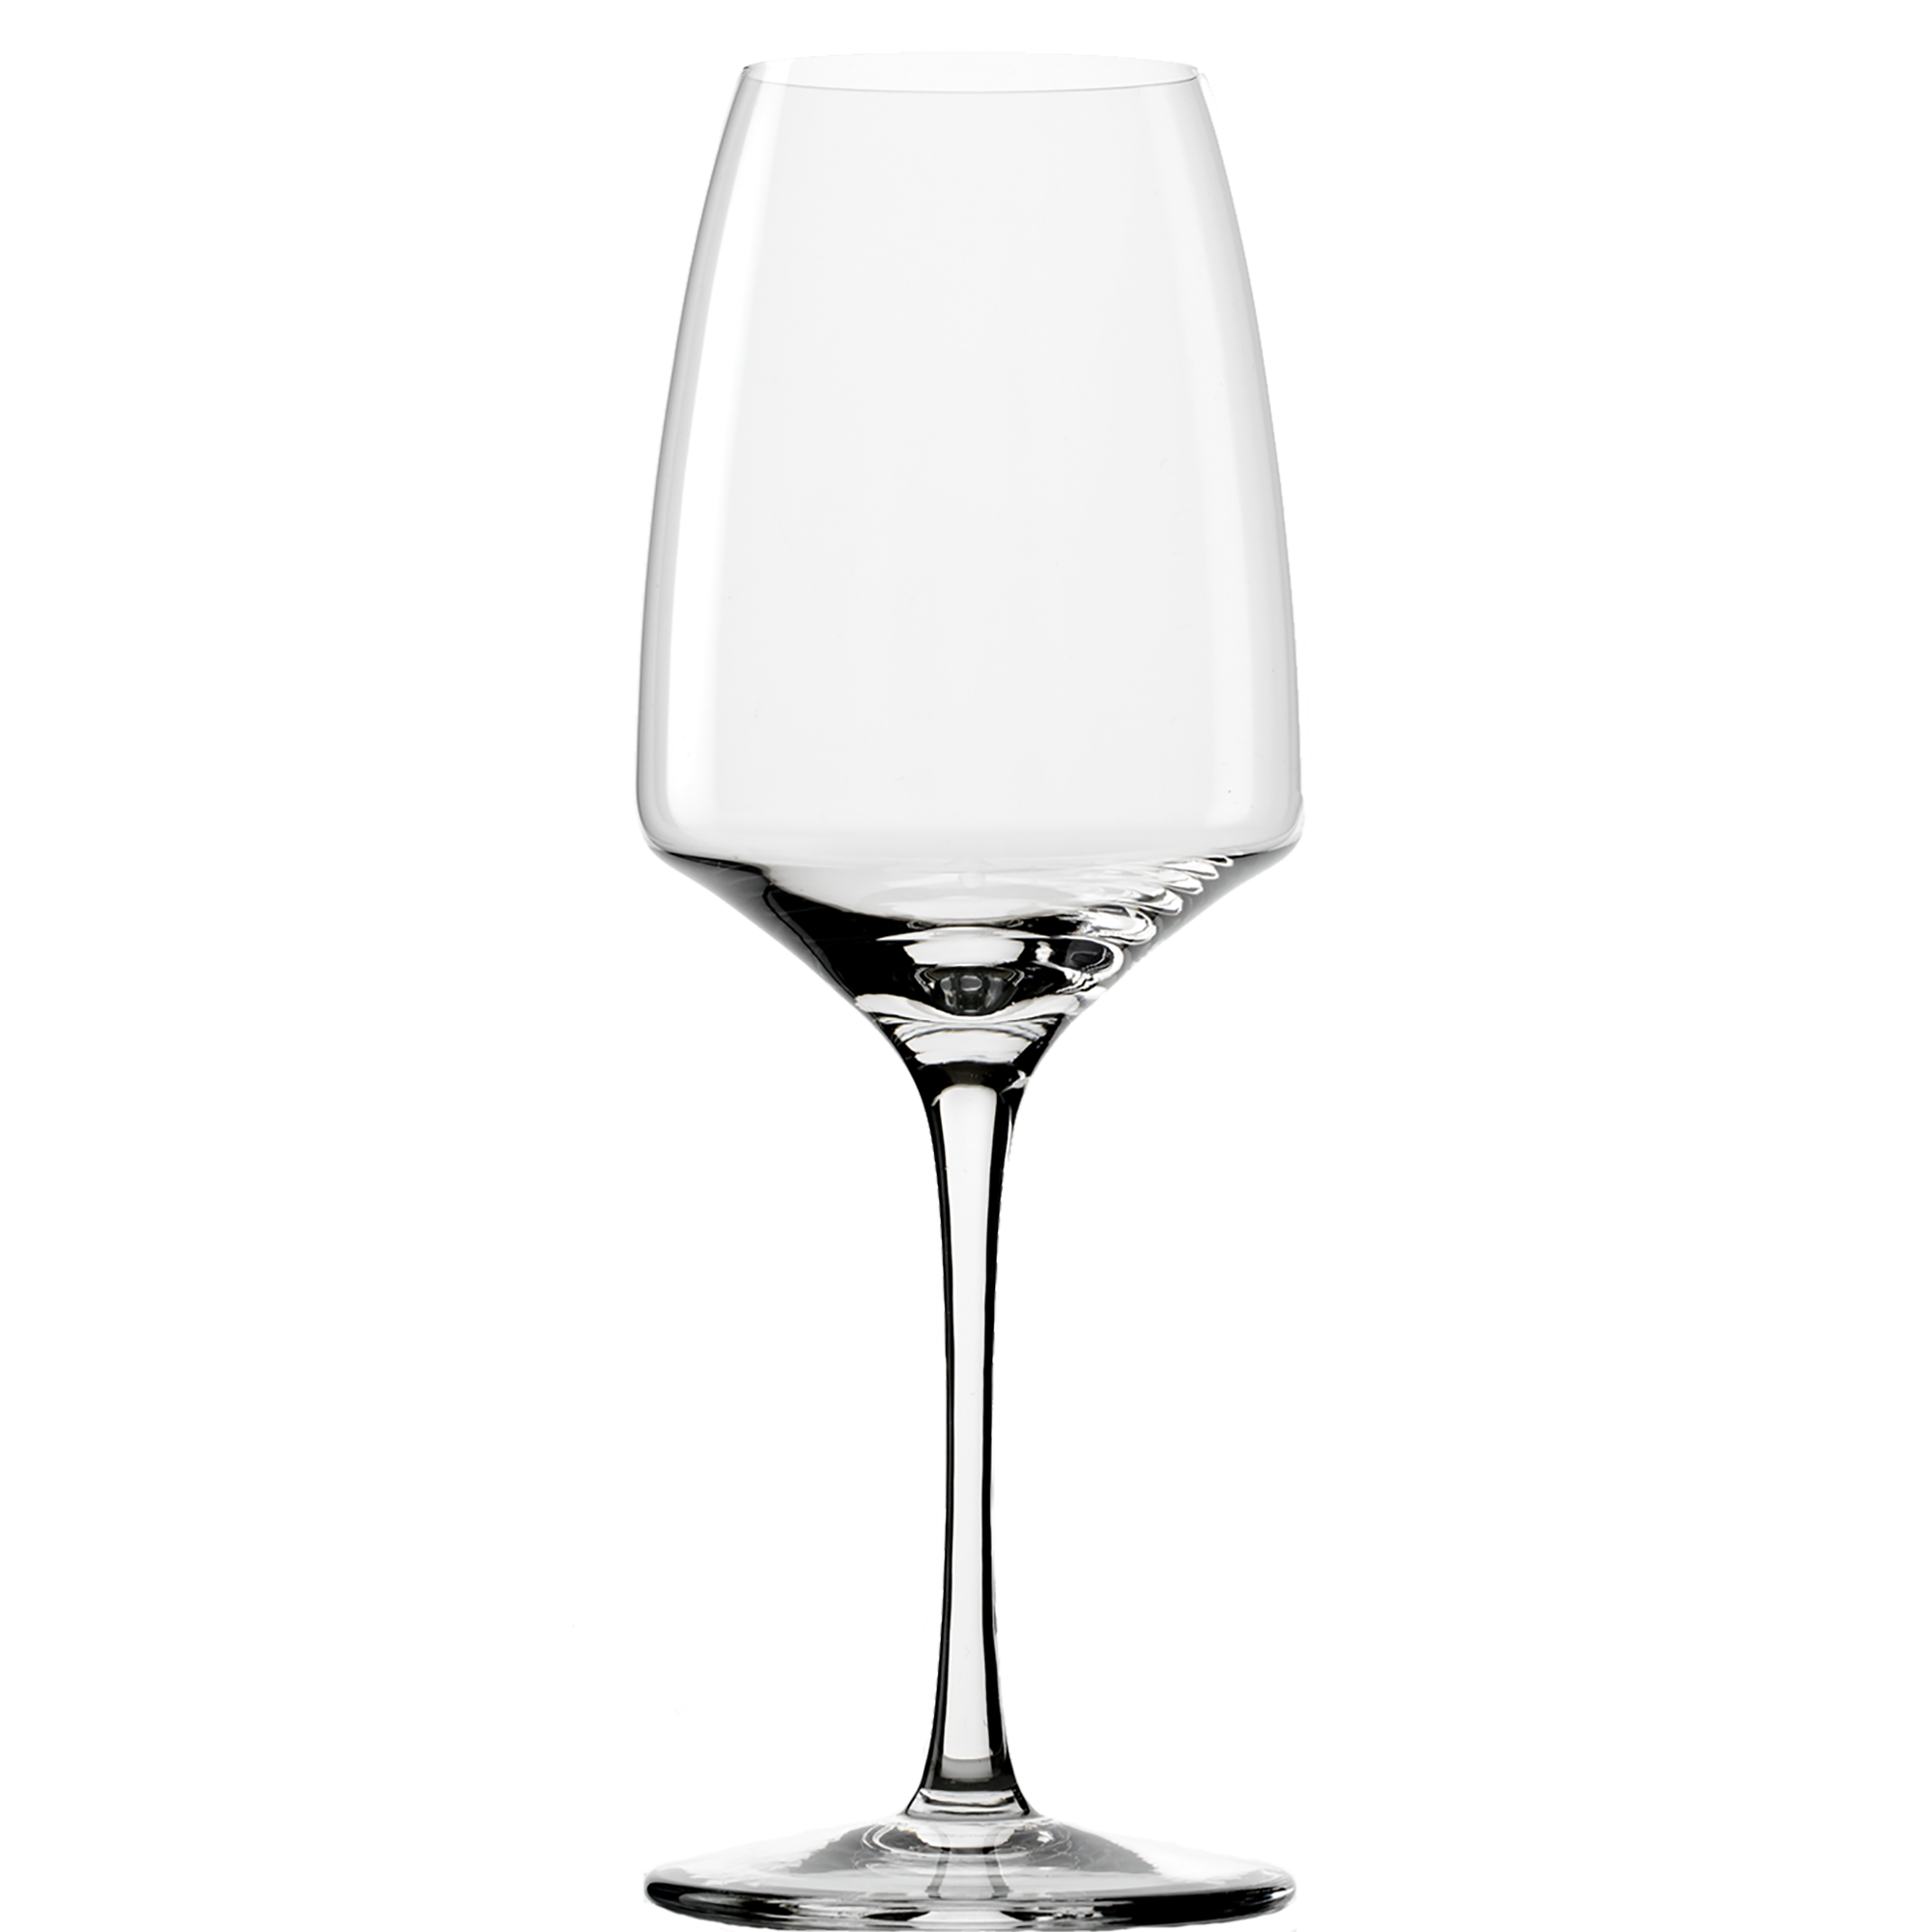 Experience All Purpose Wine Glass 15.25 oz. - Set of 4